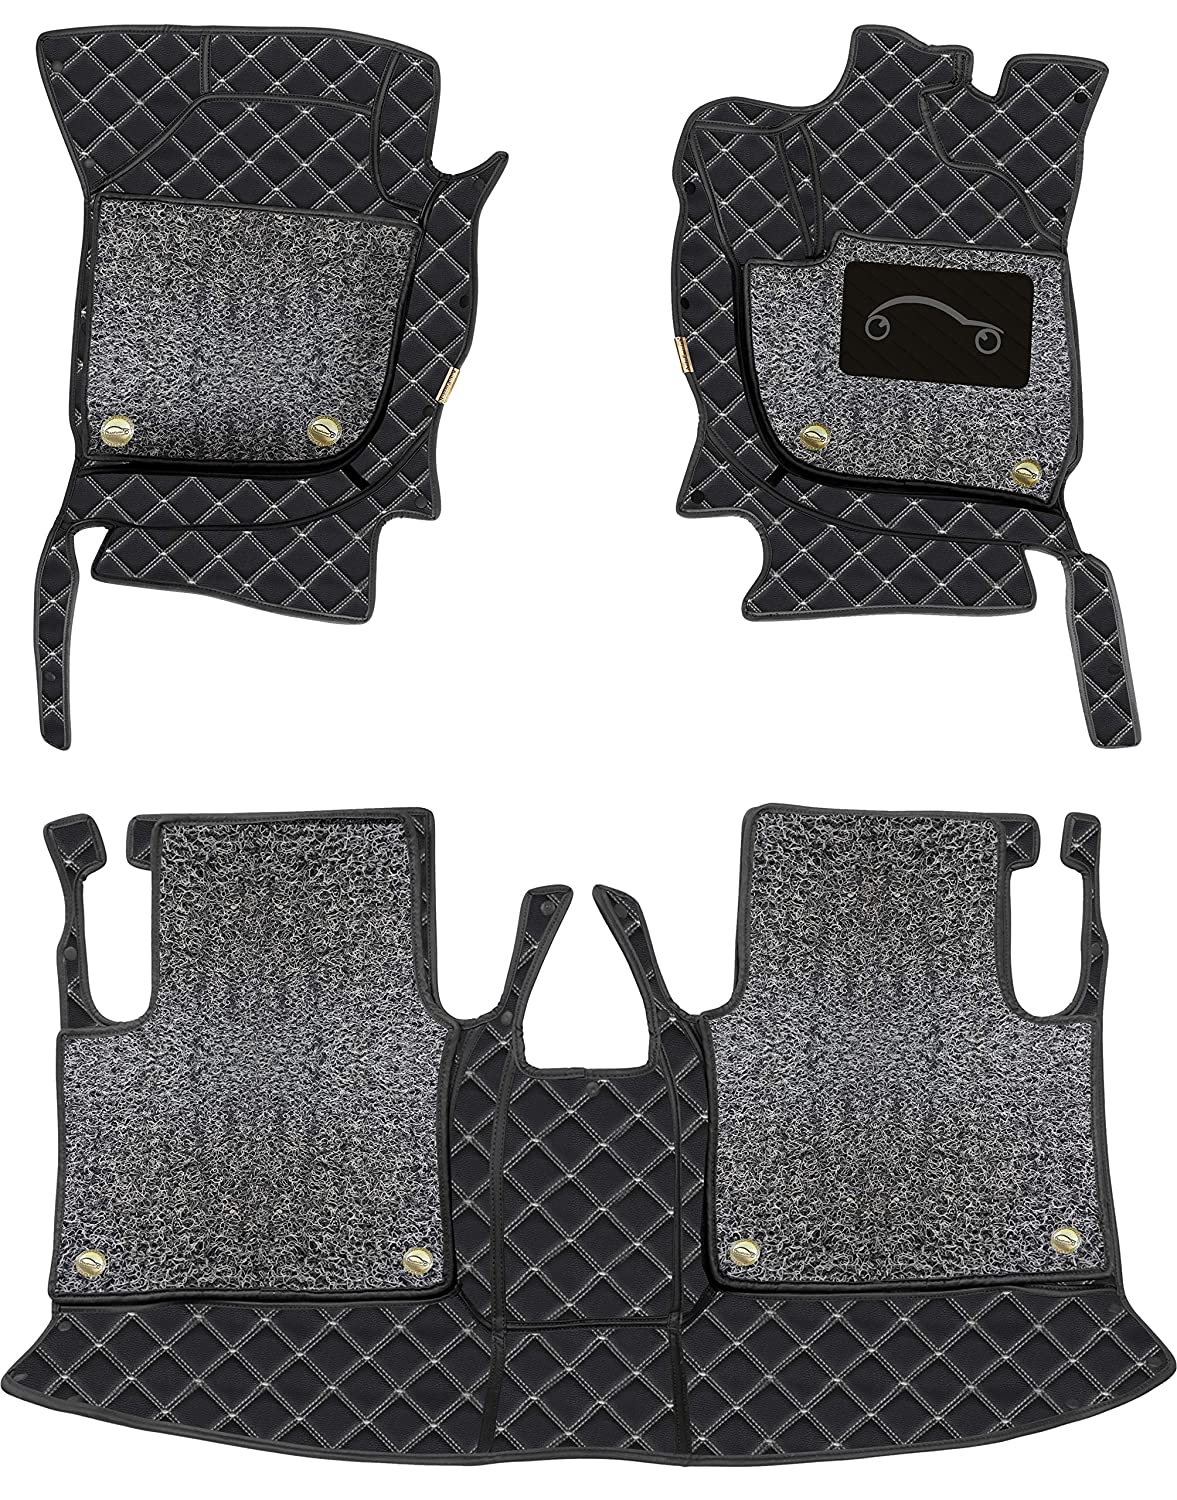 Land Rover Autobiography 2022-7D Luxury Car Mat, All Weather Proof, Anti-Skid, 100% Waterproof & Odorless with Unique Diamond Fish Design (24mm Luxury PU Leather, 2 Rows)